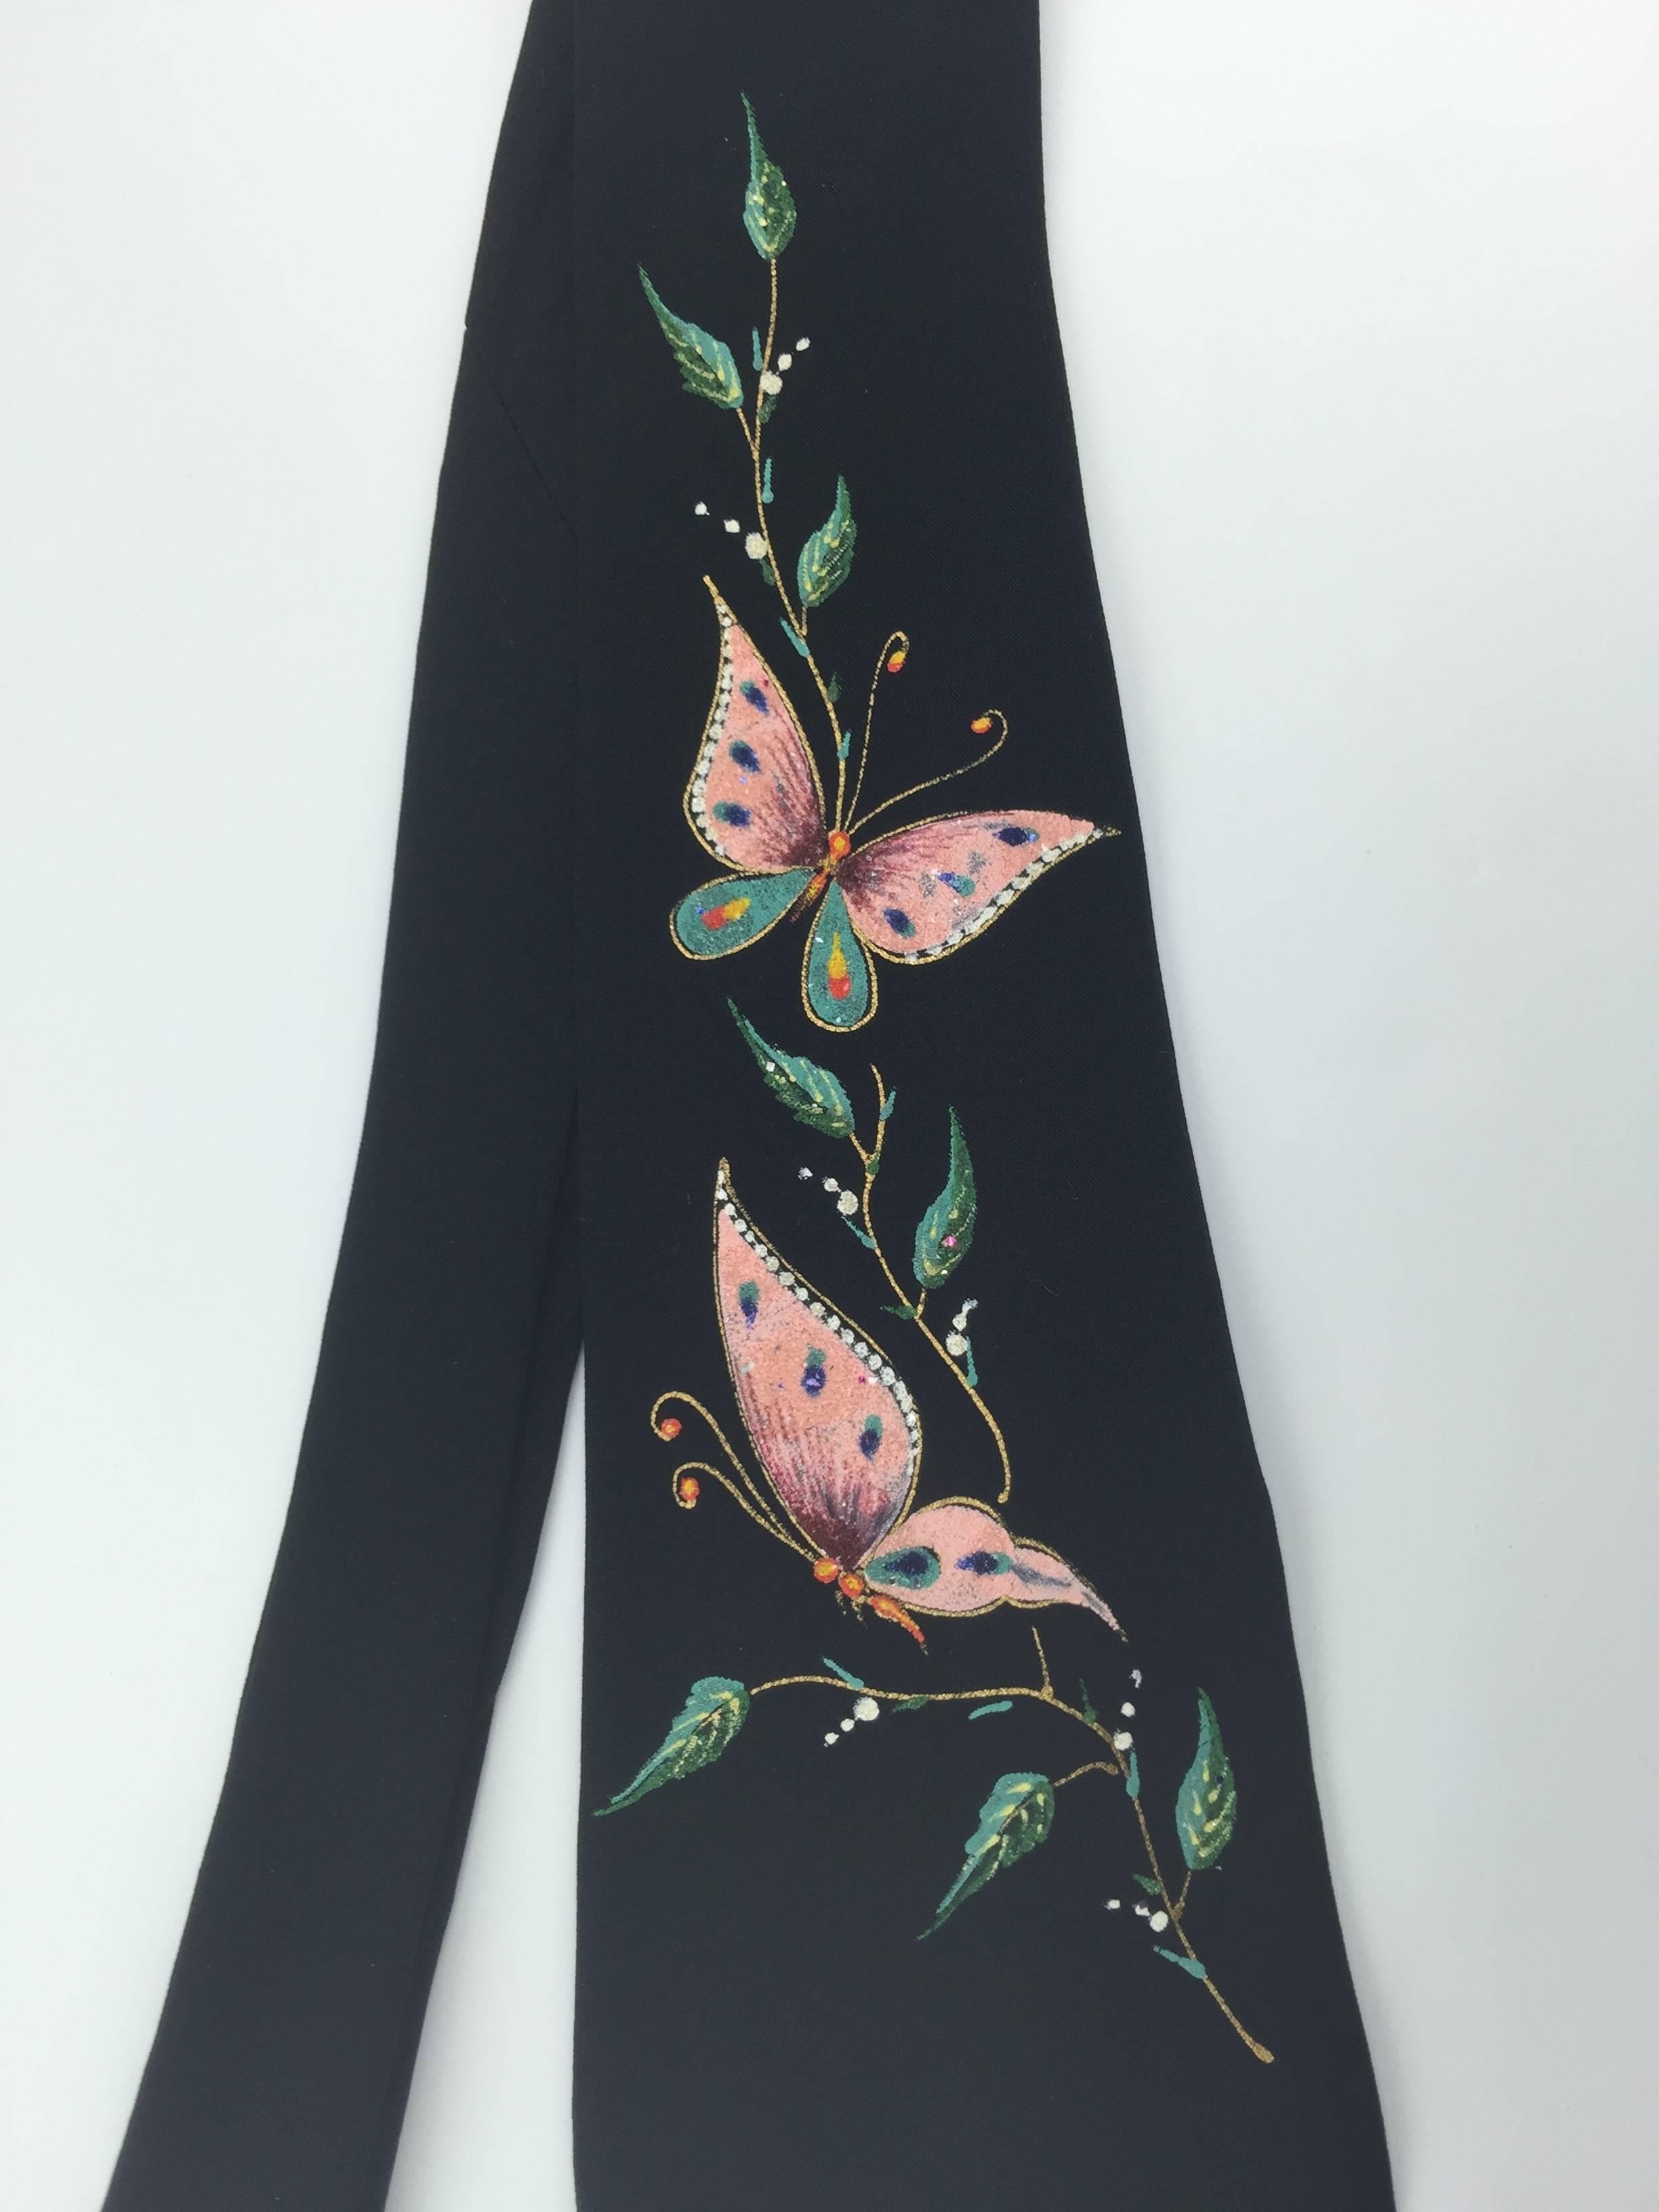 This is a stunning 1950's tie in mint condition. 

Delicate hand painted butterfies are enlivened with tiny but subtle glitter sparkles that make the design shimmer with an understated glamour.

They hover on a leafy vine.

Vivid palette of